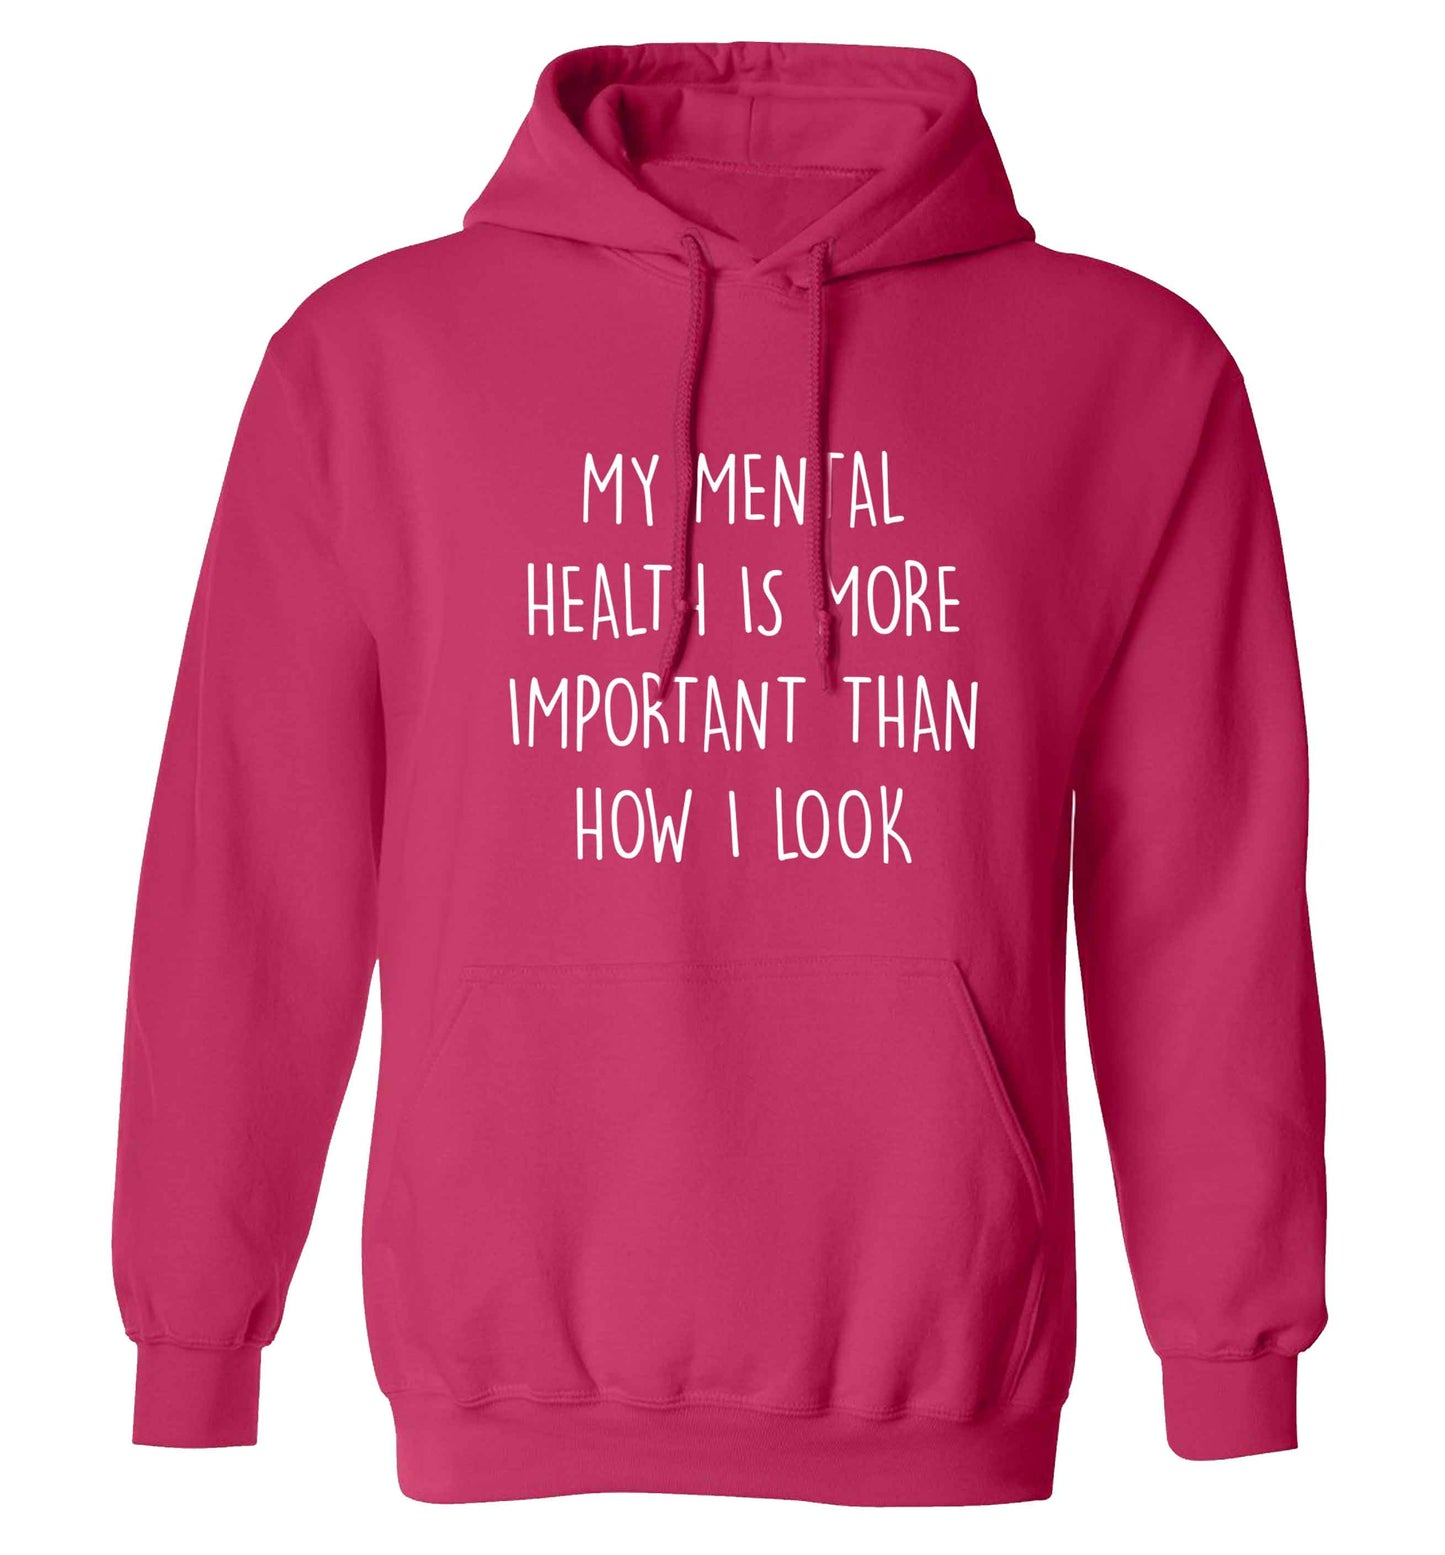 My mental health is more importnat than how I look adults unisex pink hoodie 2XL